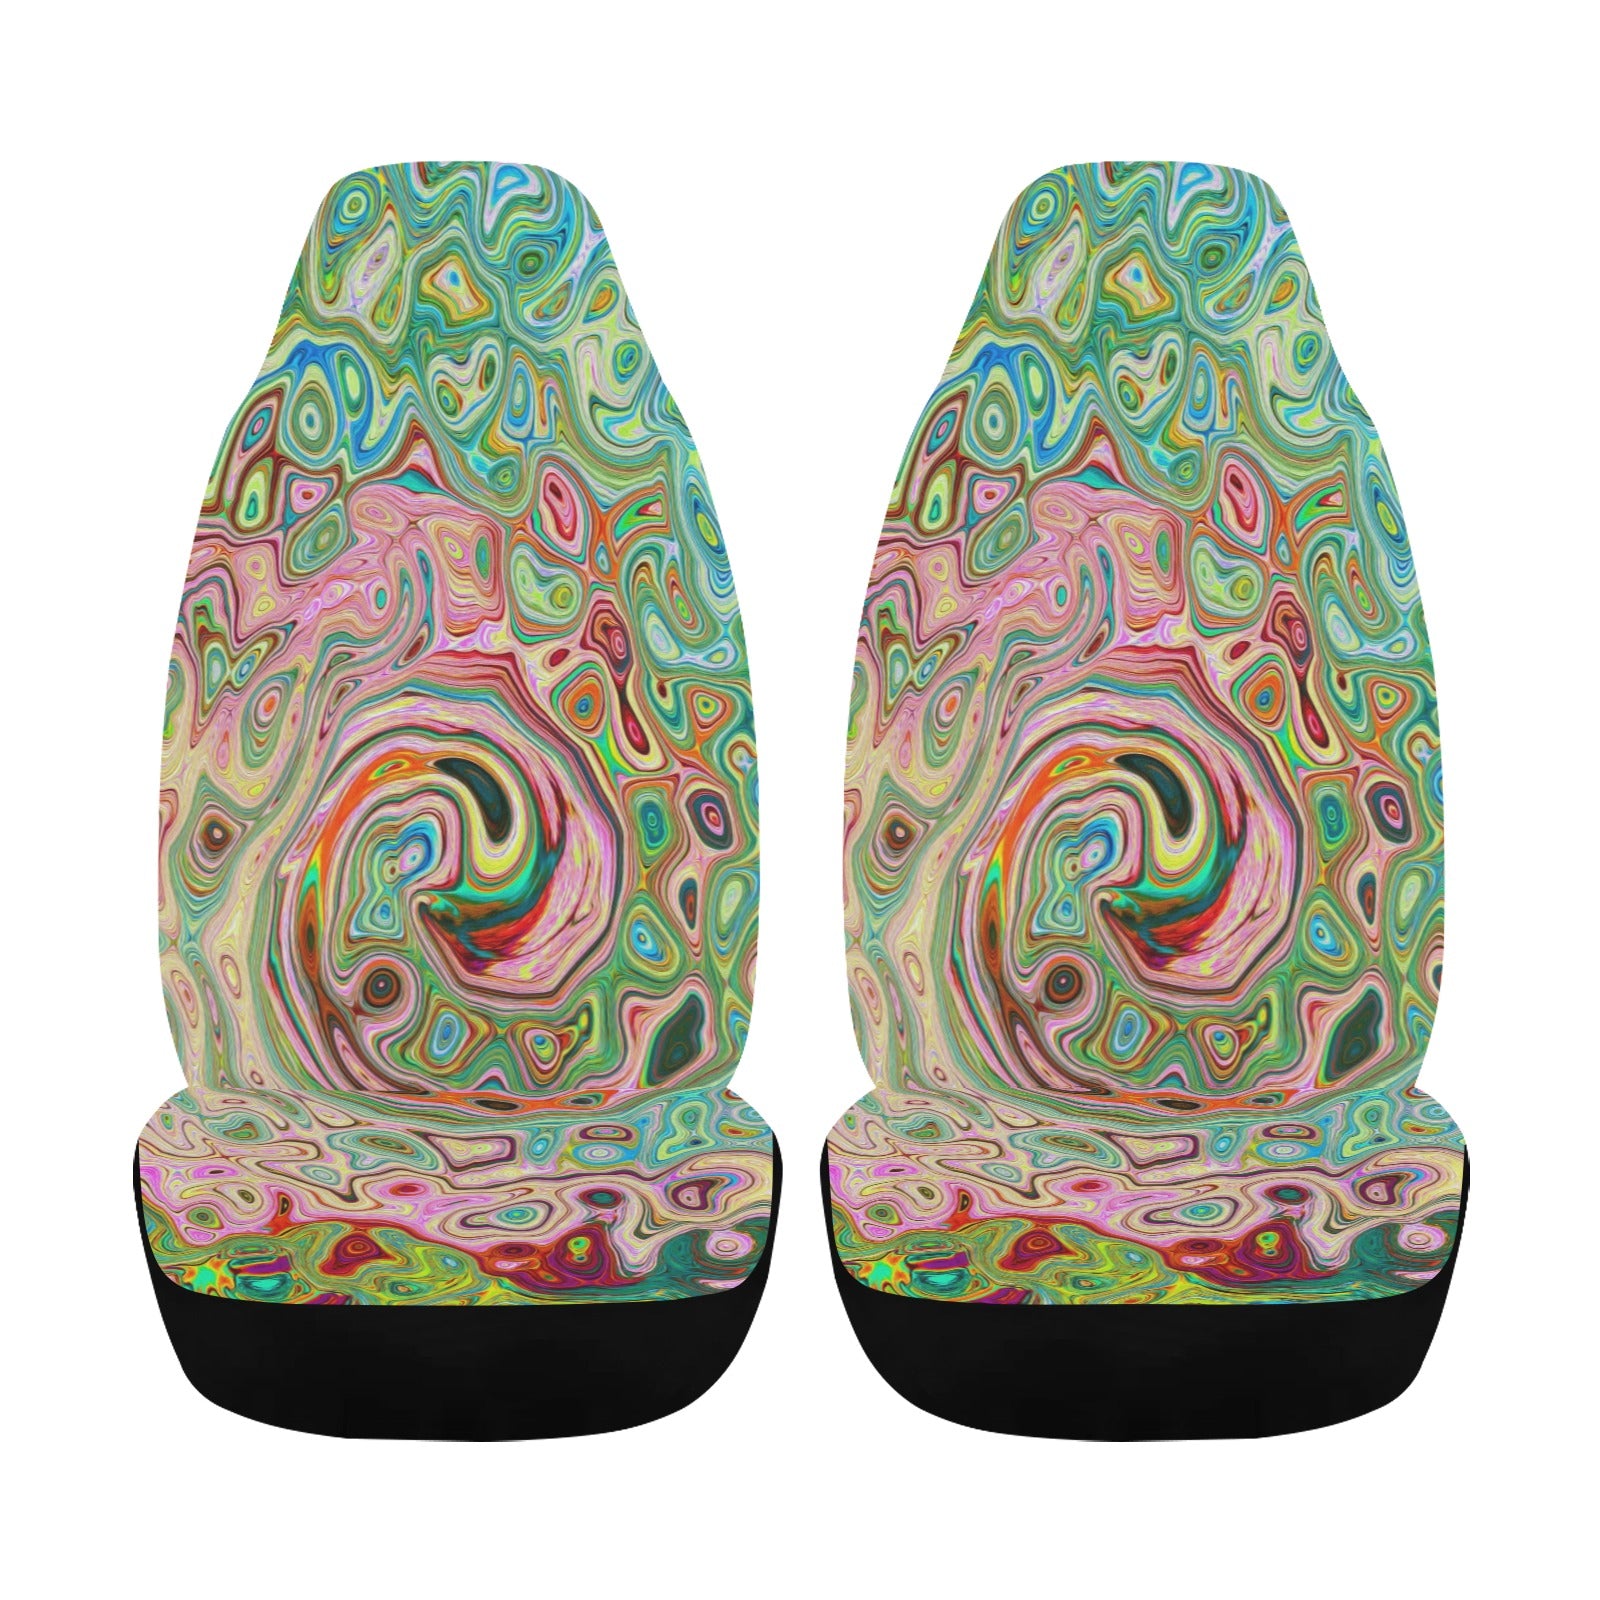 Car Seat Covers - Retro Groovy Abstract Colorful Rainbow Swirl